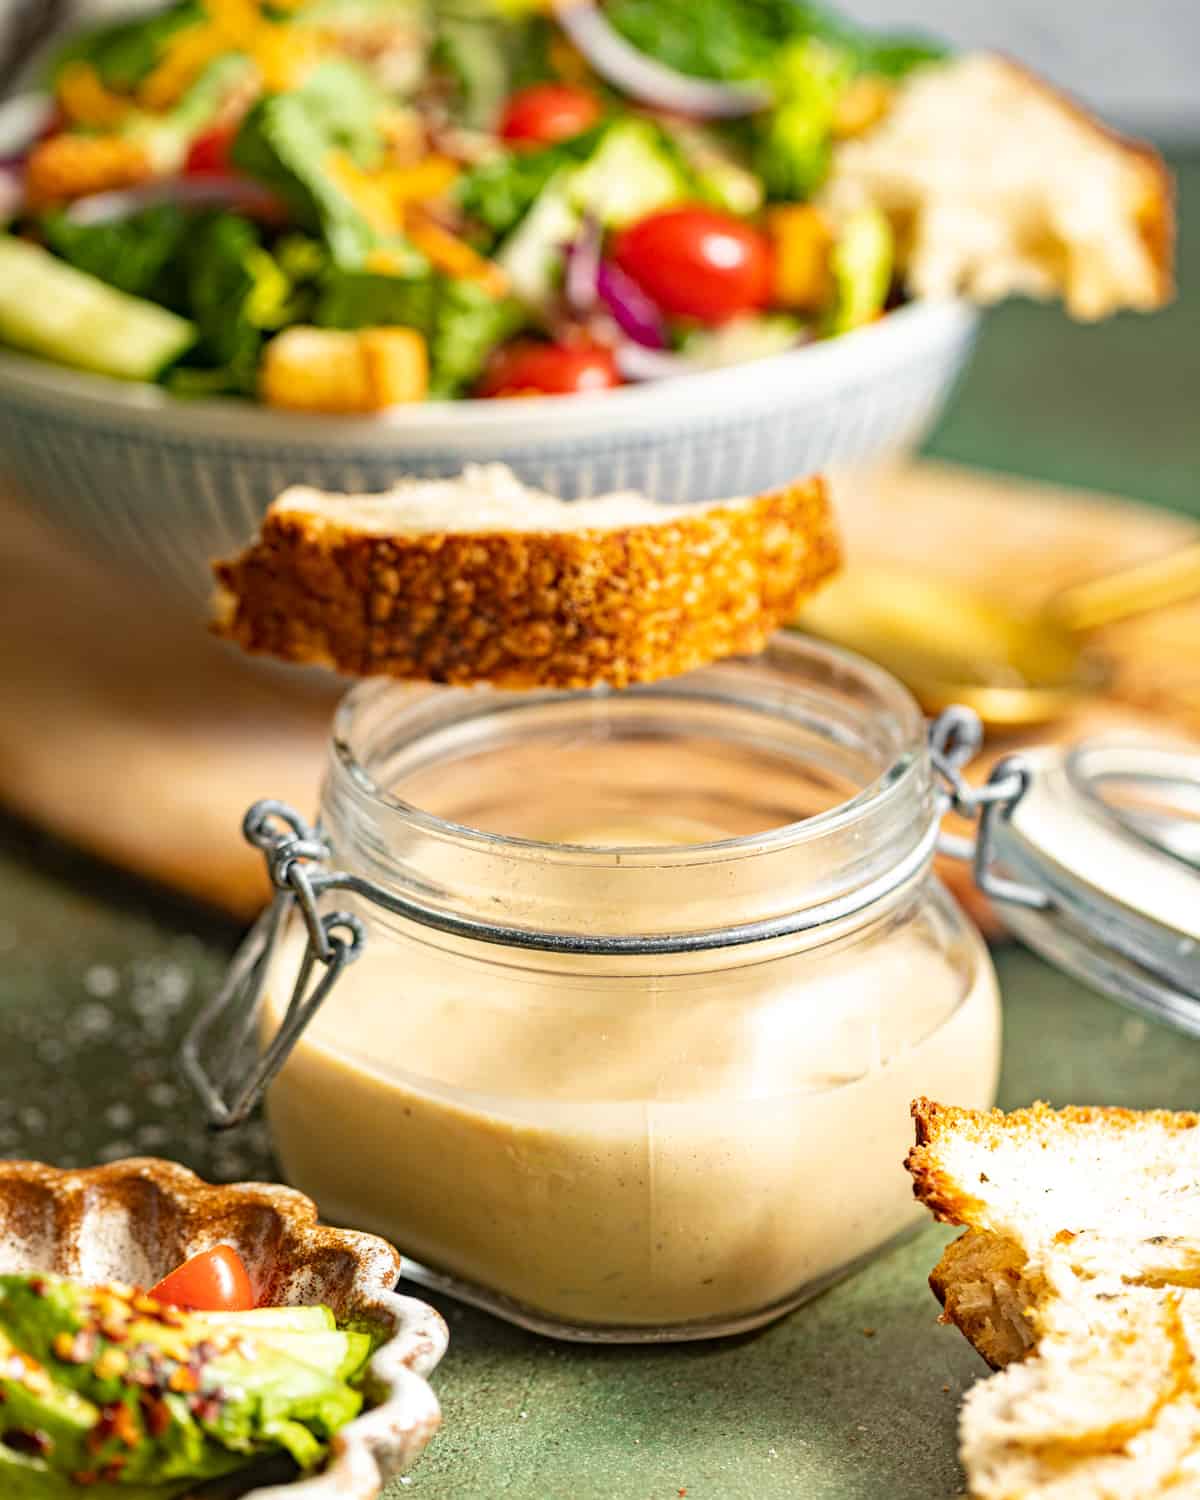 creamy balsamic dressing in a jar in front of a bowl of salad with a slice of bread on top.